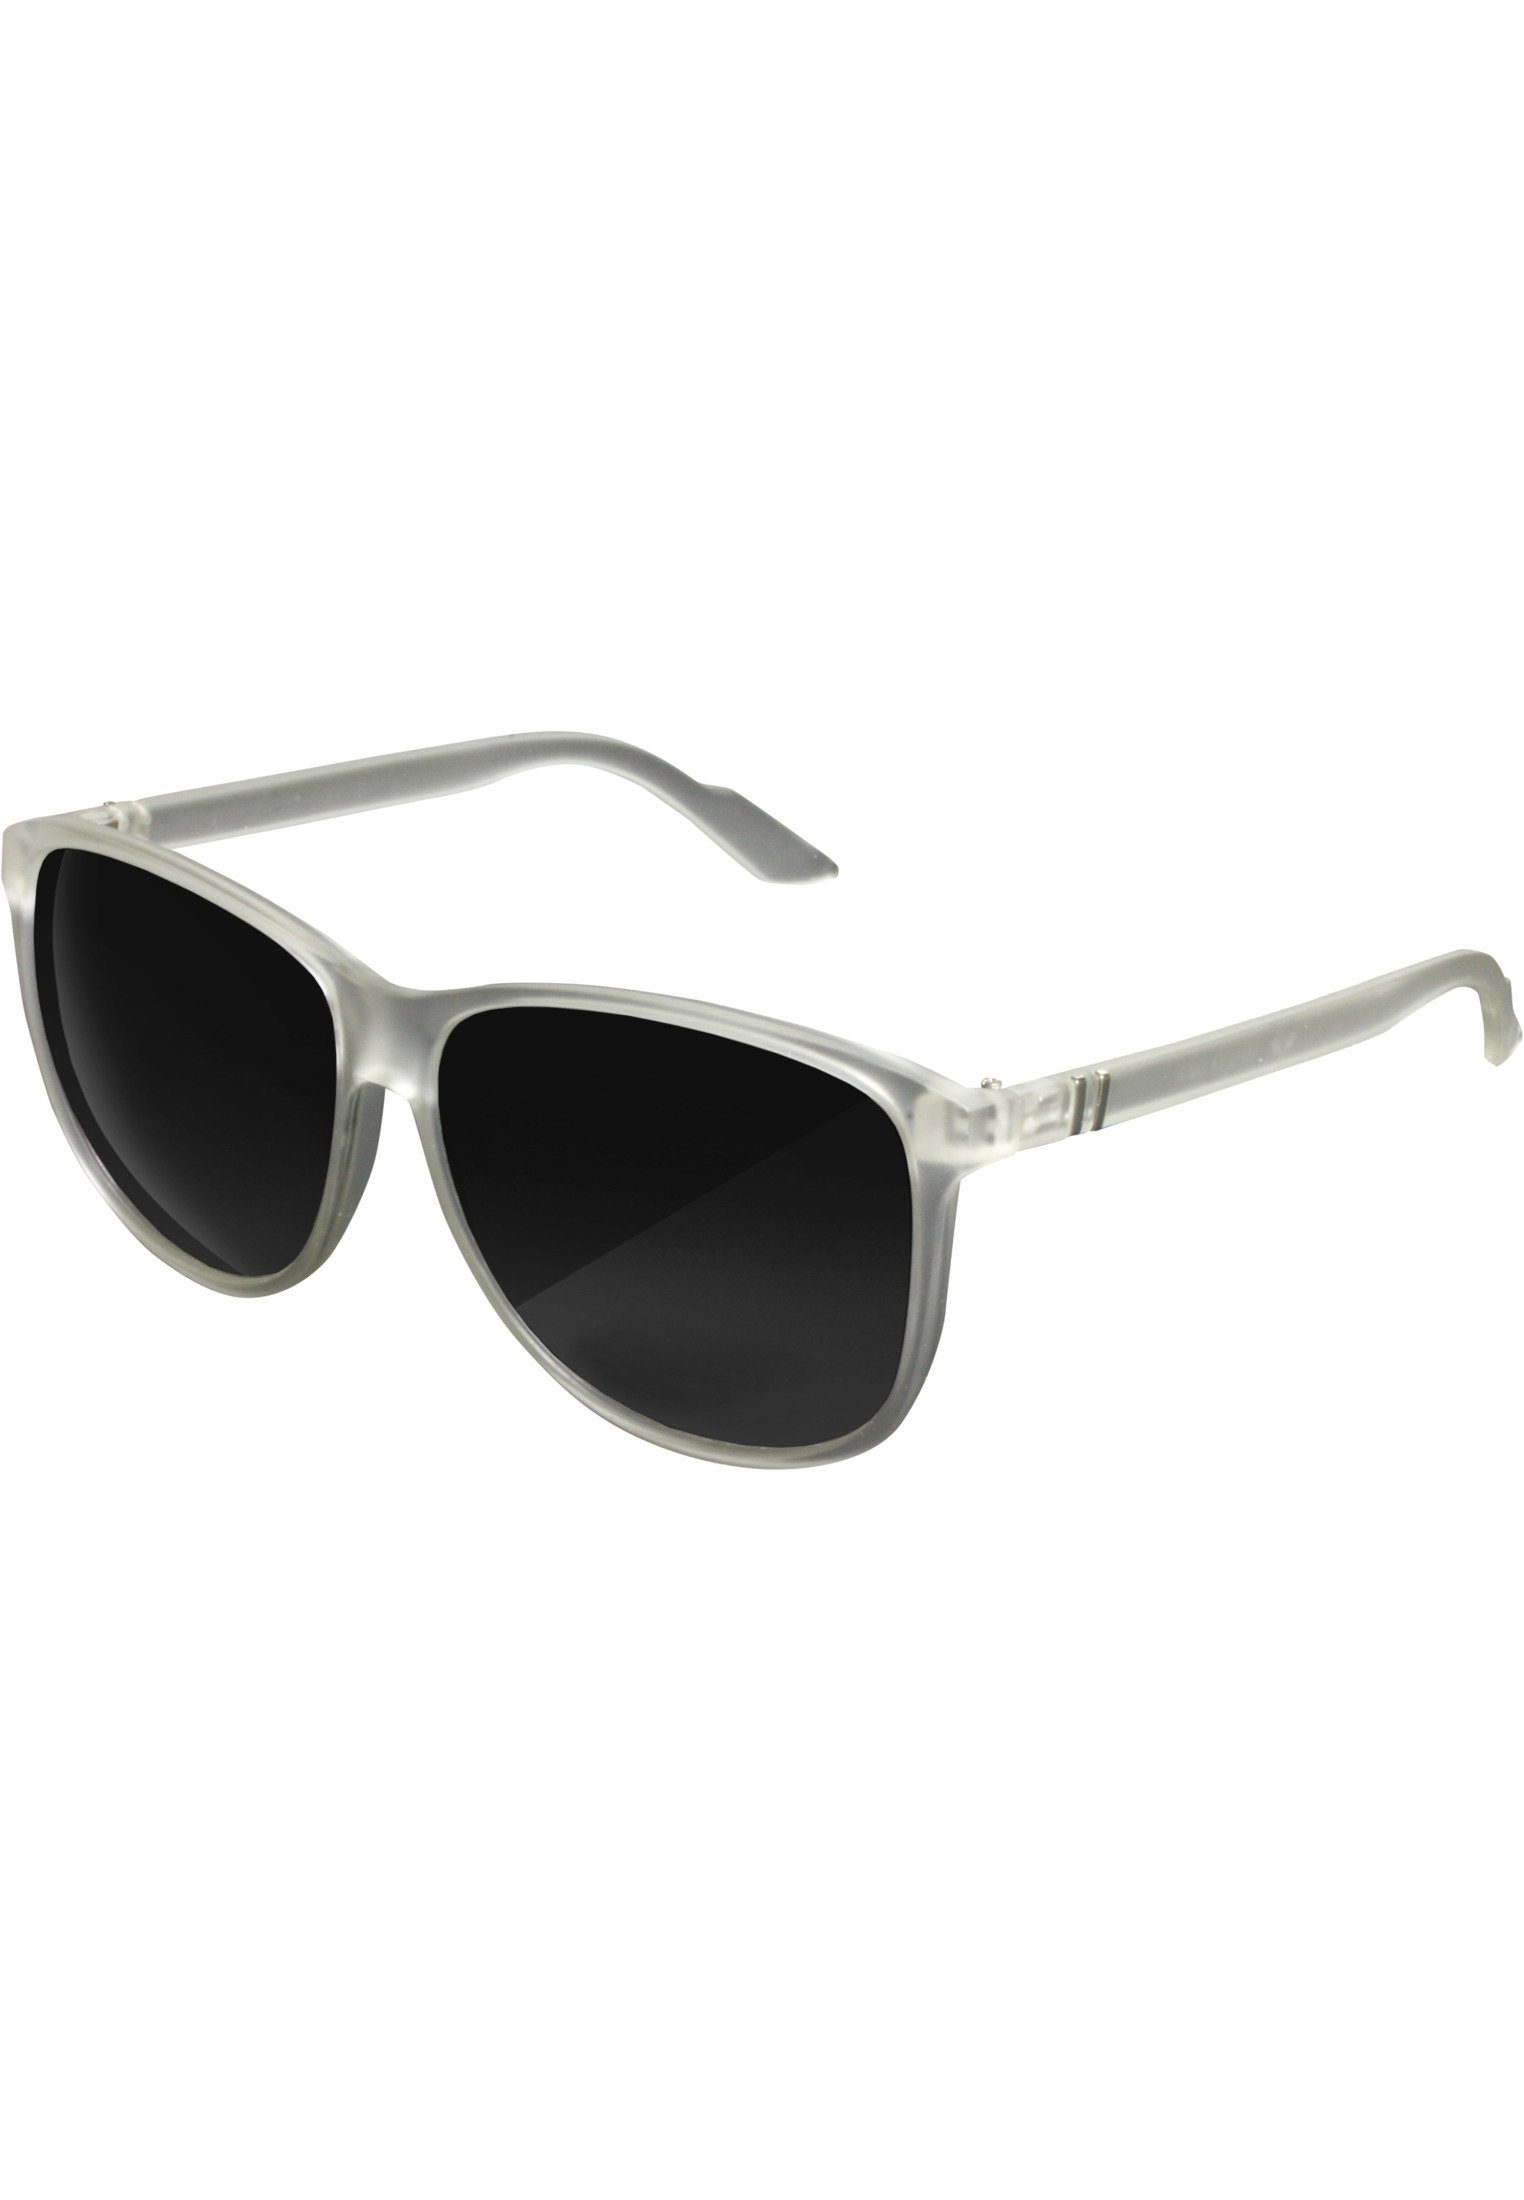 MSTRDS Sonnenbrille Accessoires clear Chirwa Sunglasses